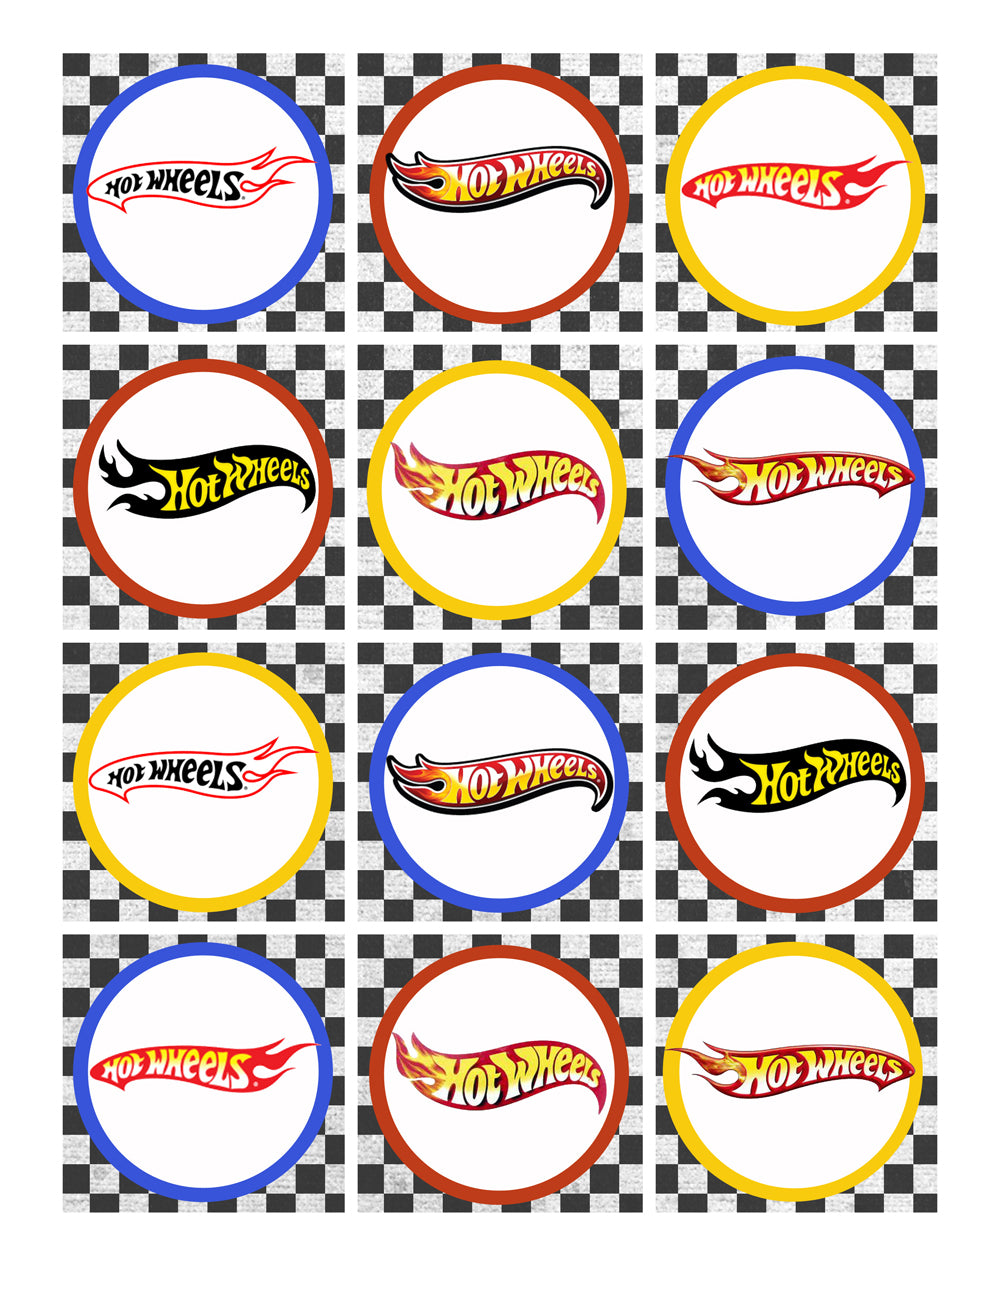 Mattel Hot Wheels Assorted Logos Black and White Checkered Background Edible Cupcake Topper Images ABPID01257